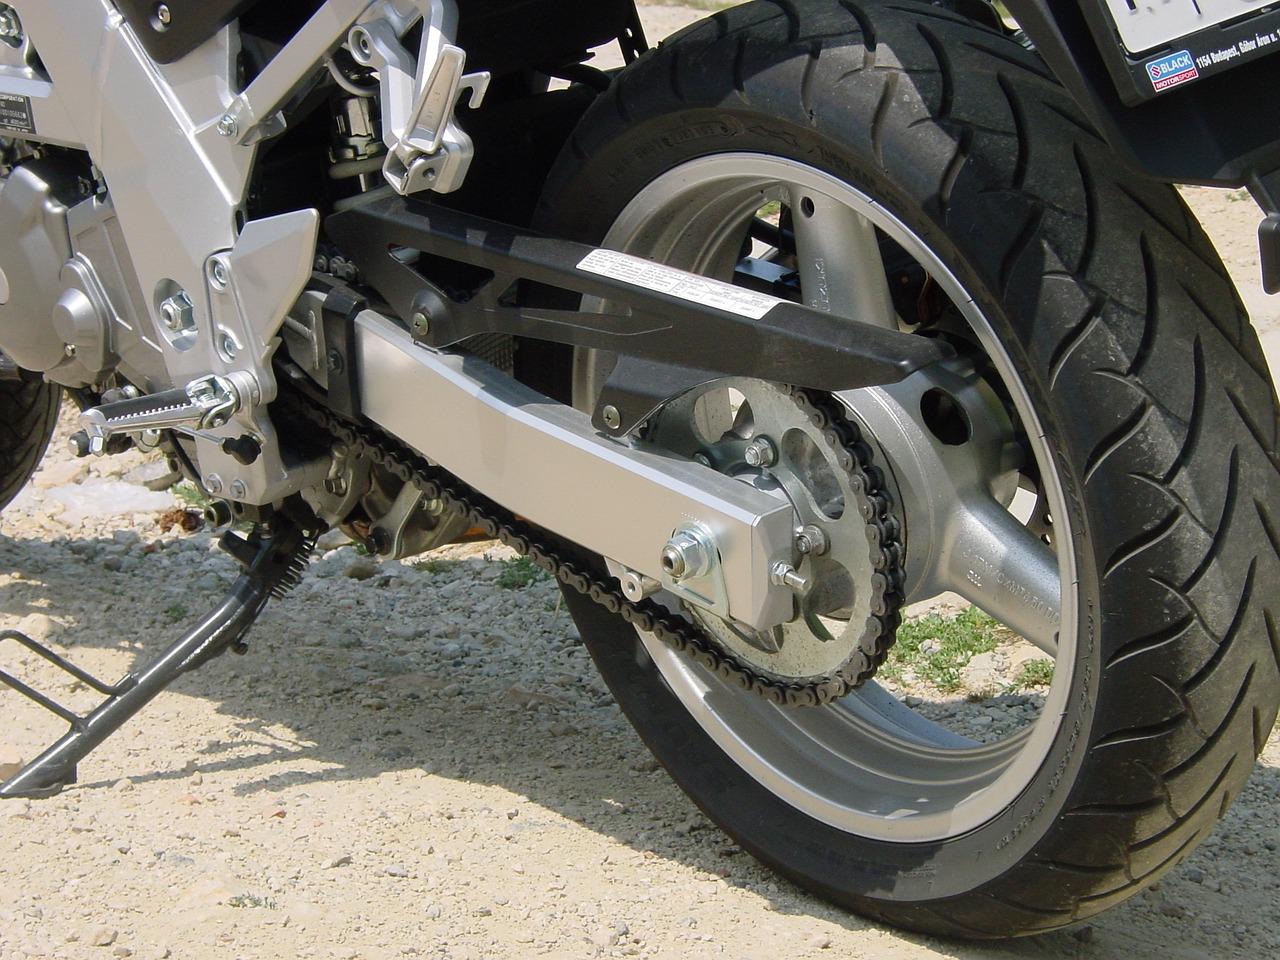 Close up of a motorcycle back tire